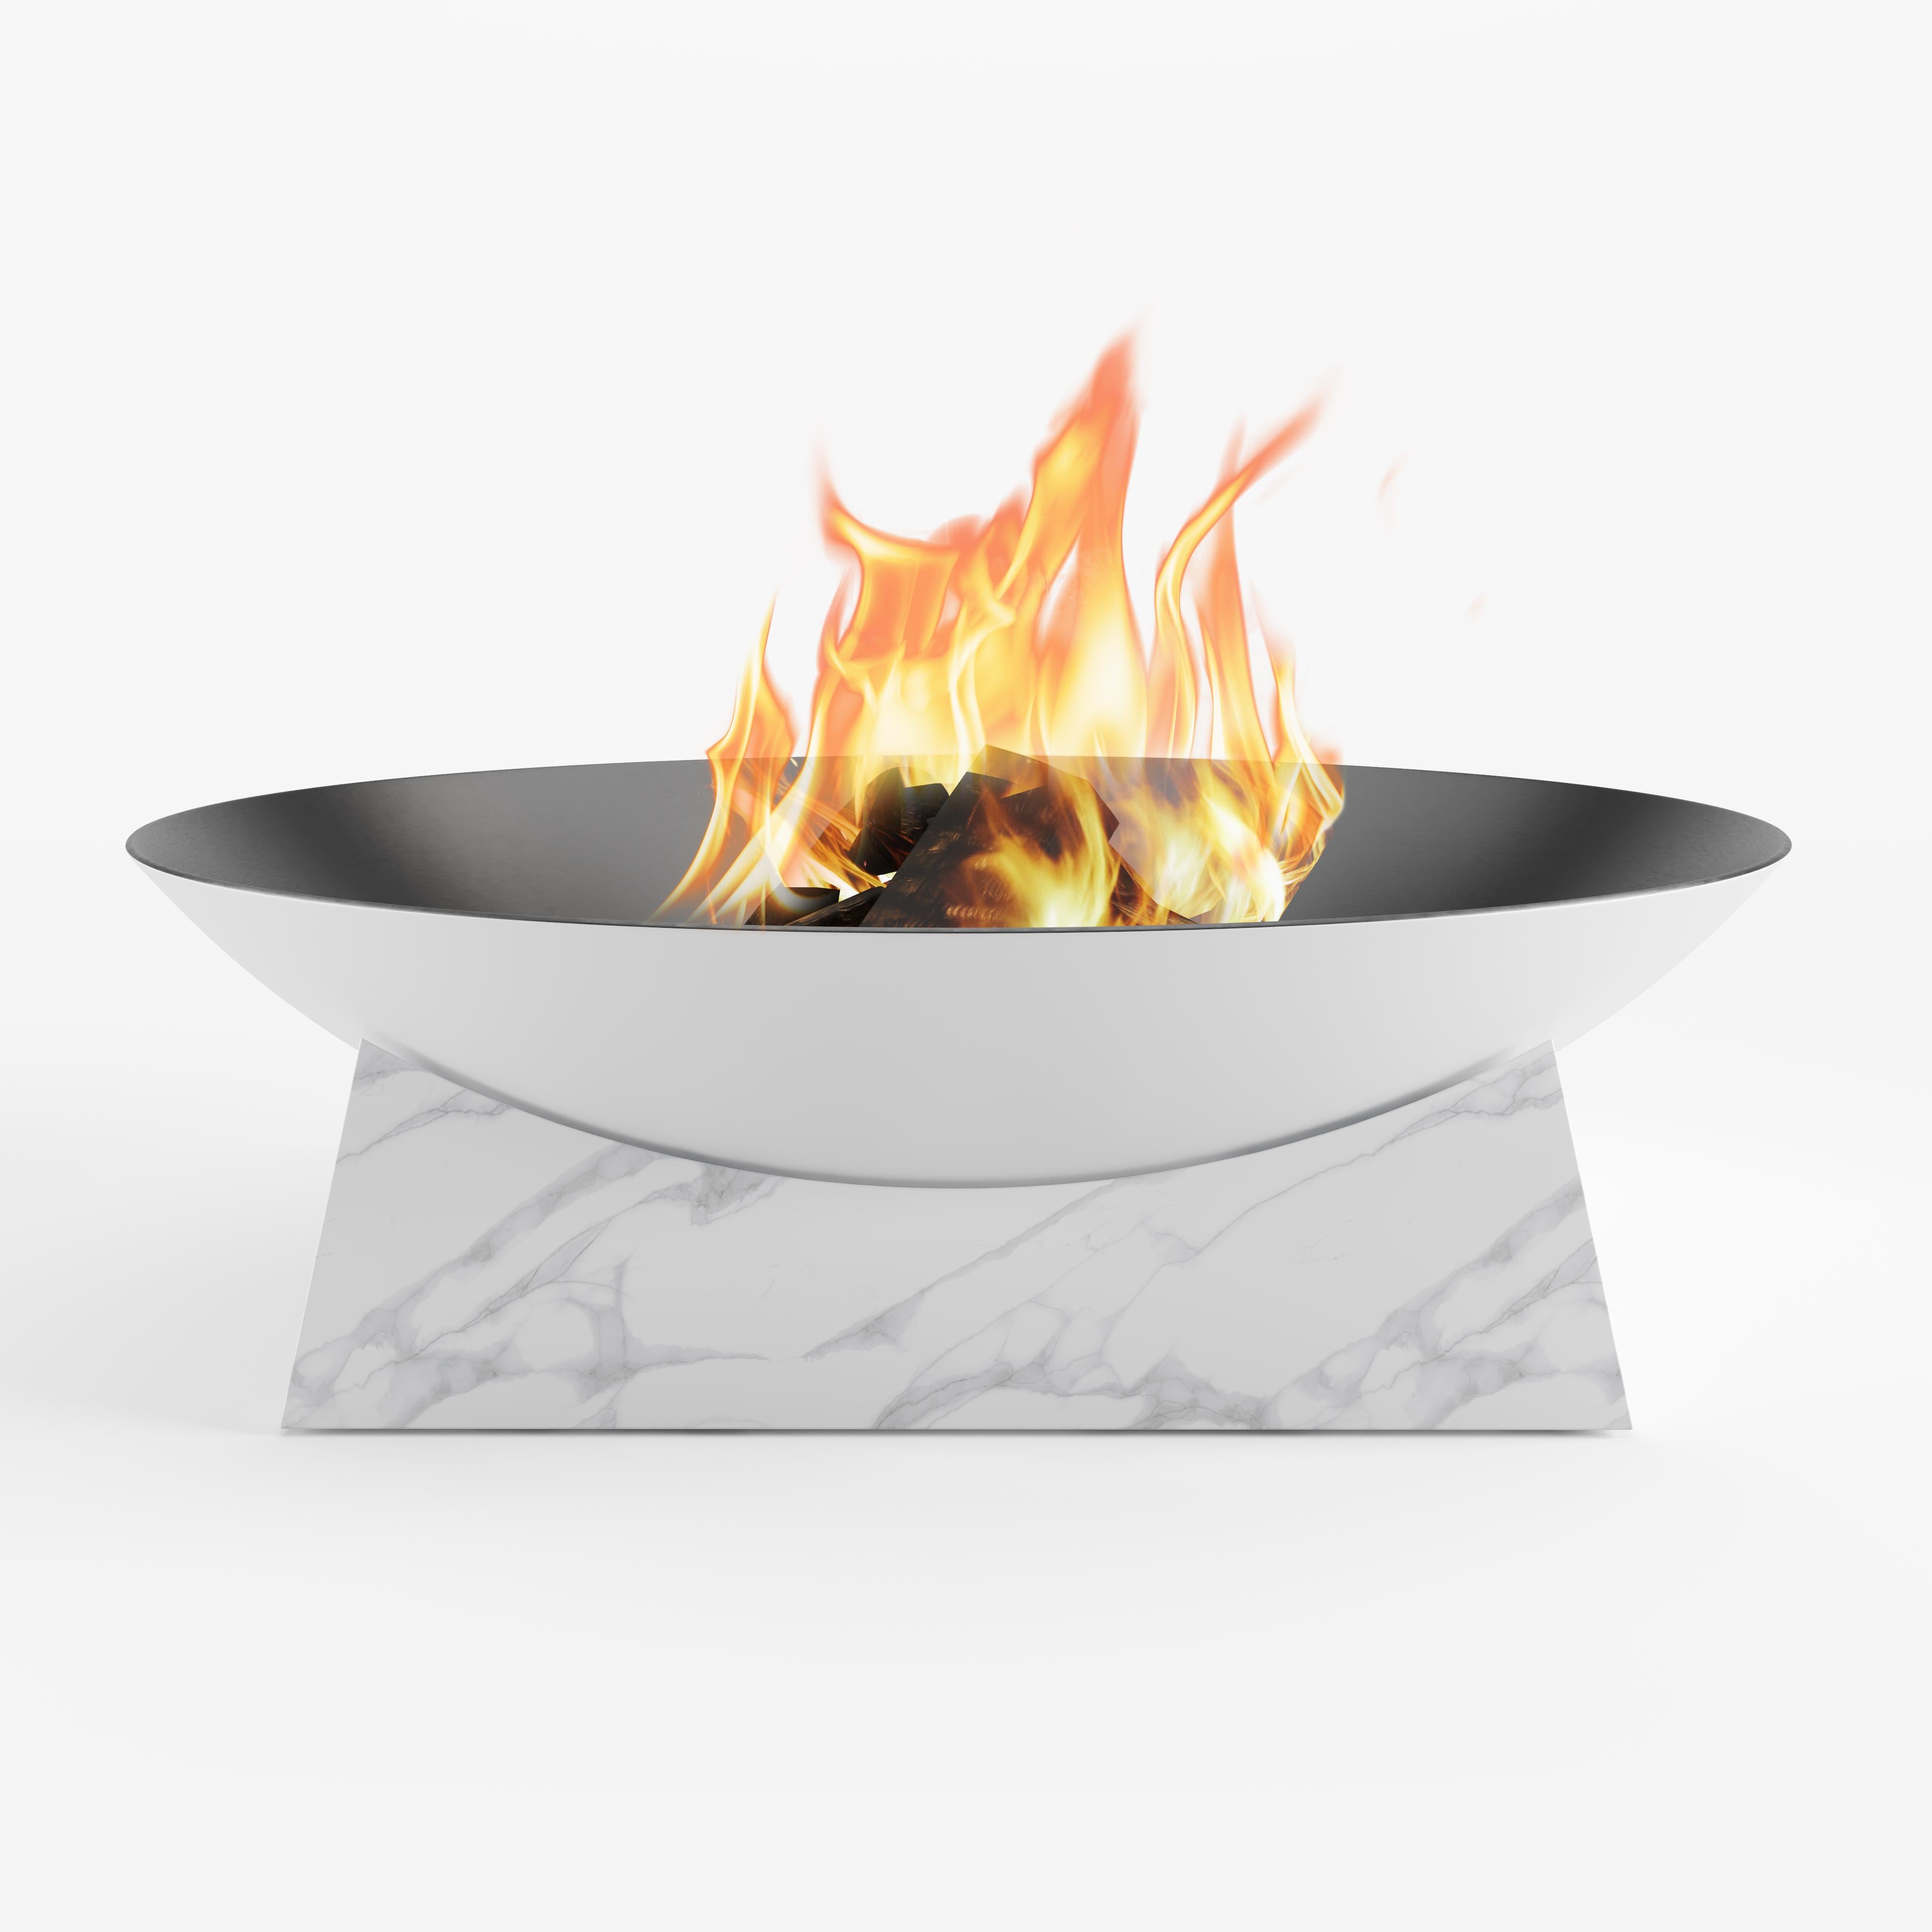 Sphere Outdoor Fire Pit

A modern outdoor fire pit that will complete your outdoor spaces and bring them the coziness and warmth needed in the colder days. Will allow to enjoy your outdoor spaces all year long!

The whole design of this modern